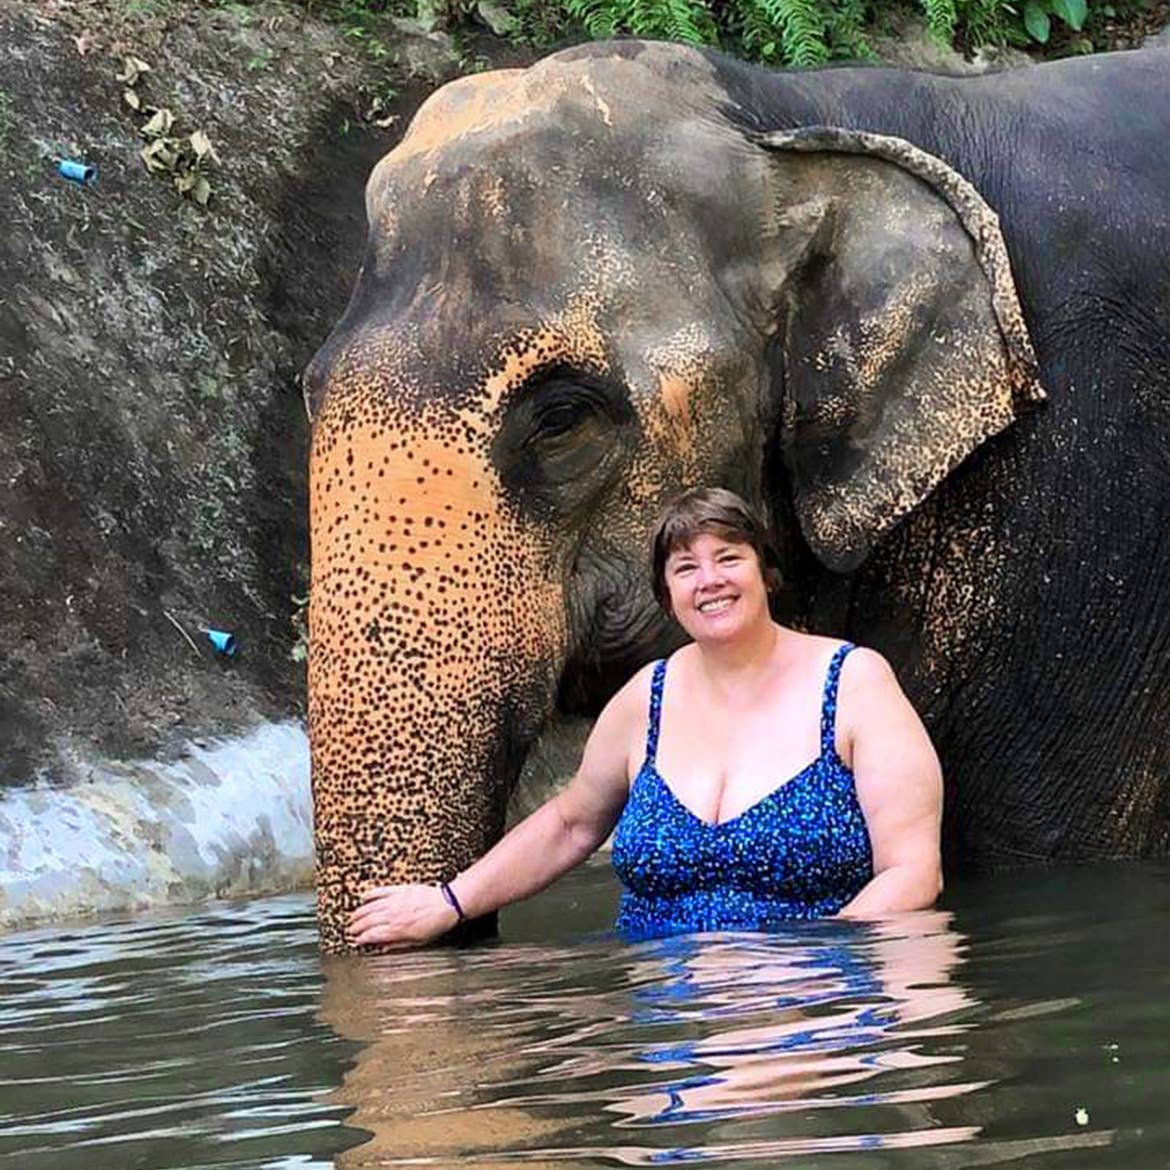 A caucasian woman wearing a blue swimsuit stands near an elephant submerged in water in Phuket, Thailand.